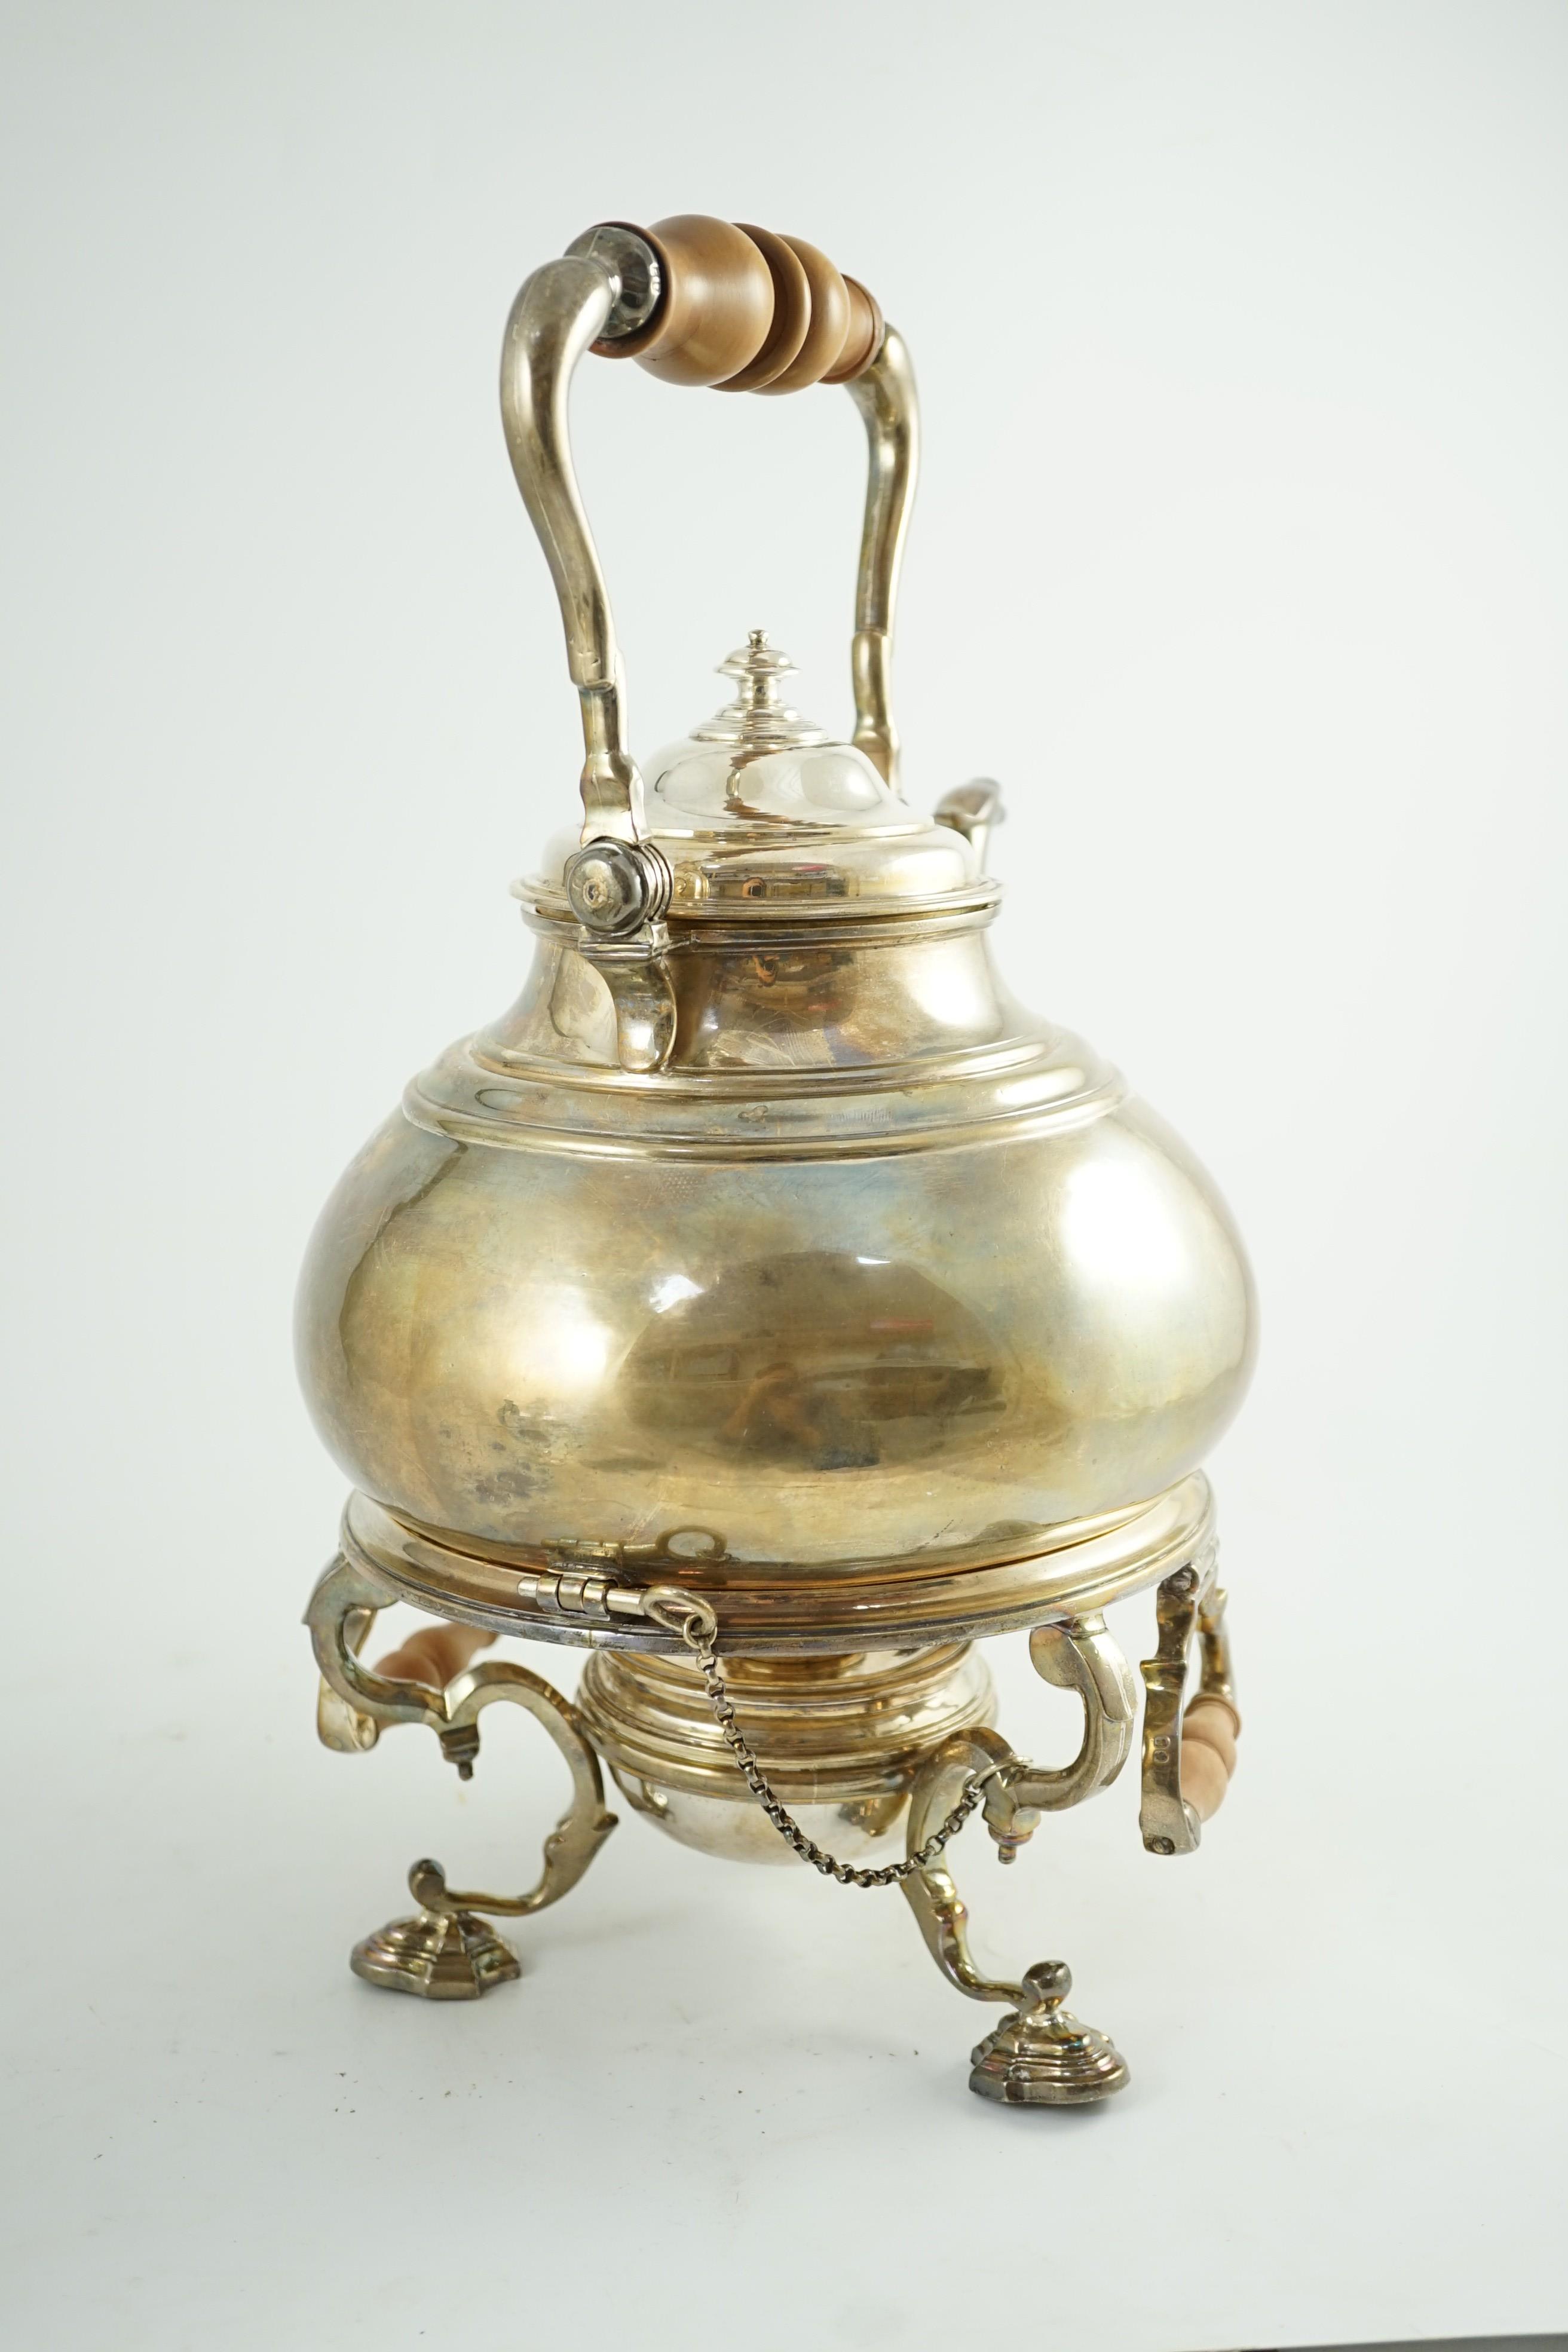 A large George V Britannia standard silver tea kettle on two handled stand, with burner, by Charles & Richard Comyns